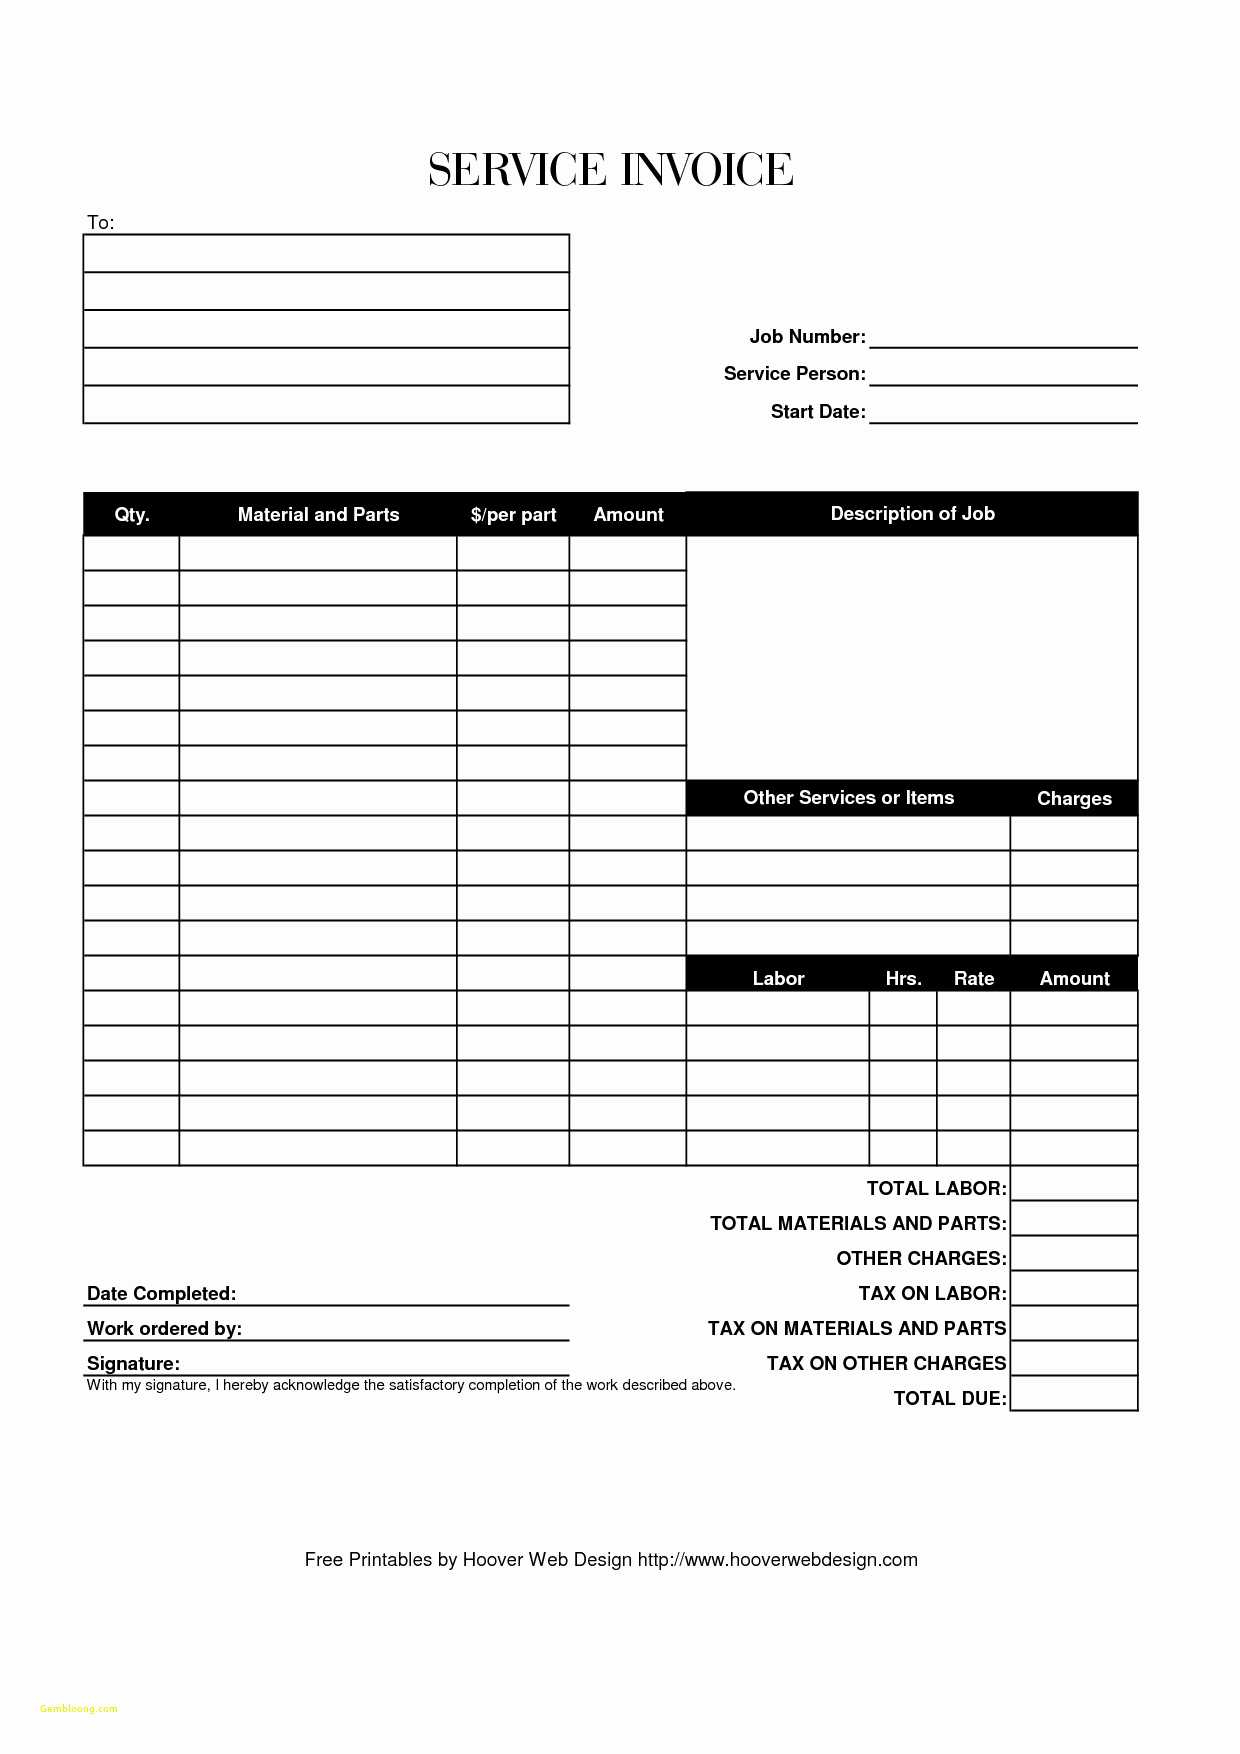 Receipt Spreadsheet For Excel Spreadsheet For Receipts Along With Key Receipt Template